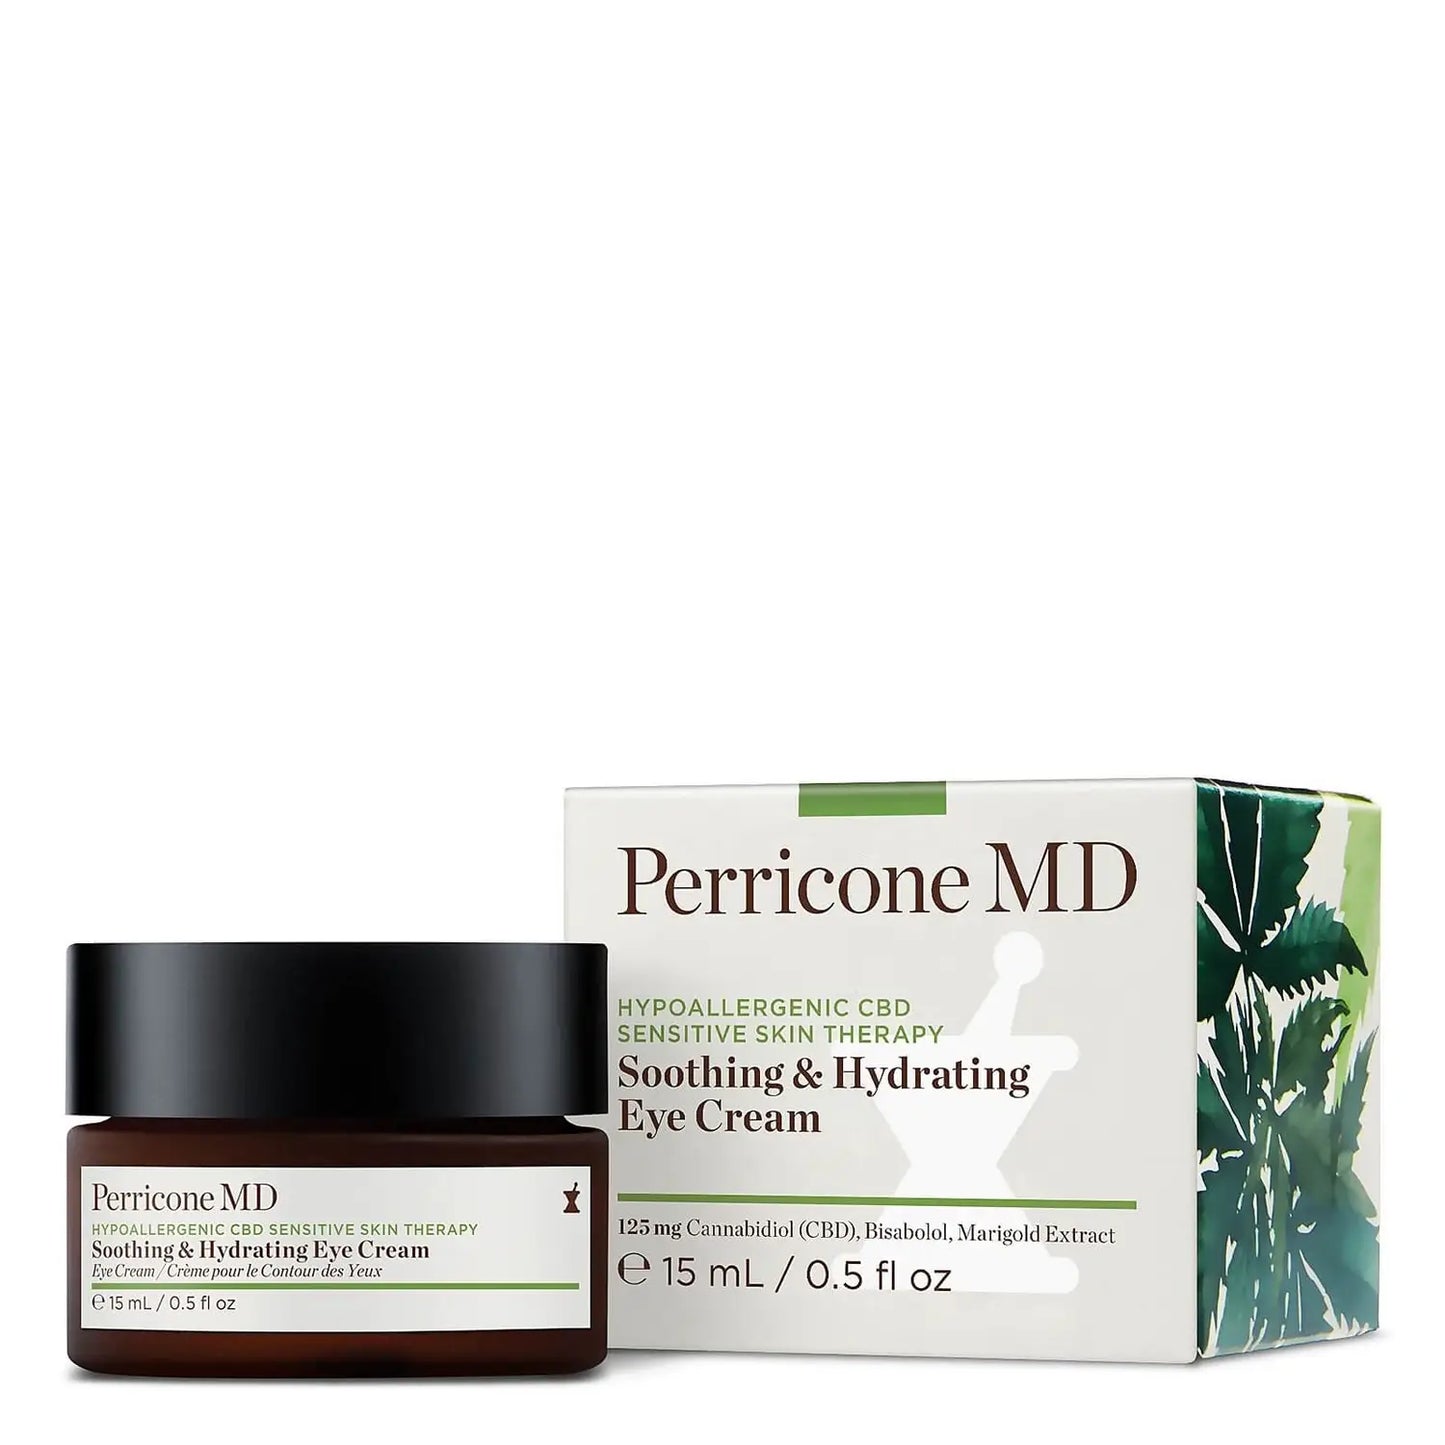 Perricone MD Hypoallergenic CBD Sensitive Skin Therapy Soothing & Hydrating Eye Cream 15ml packaging